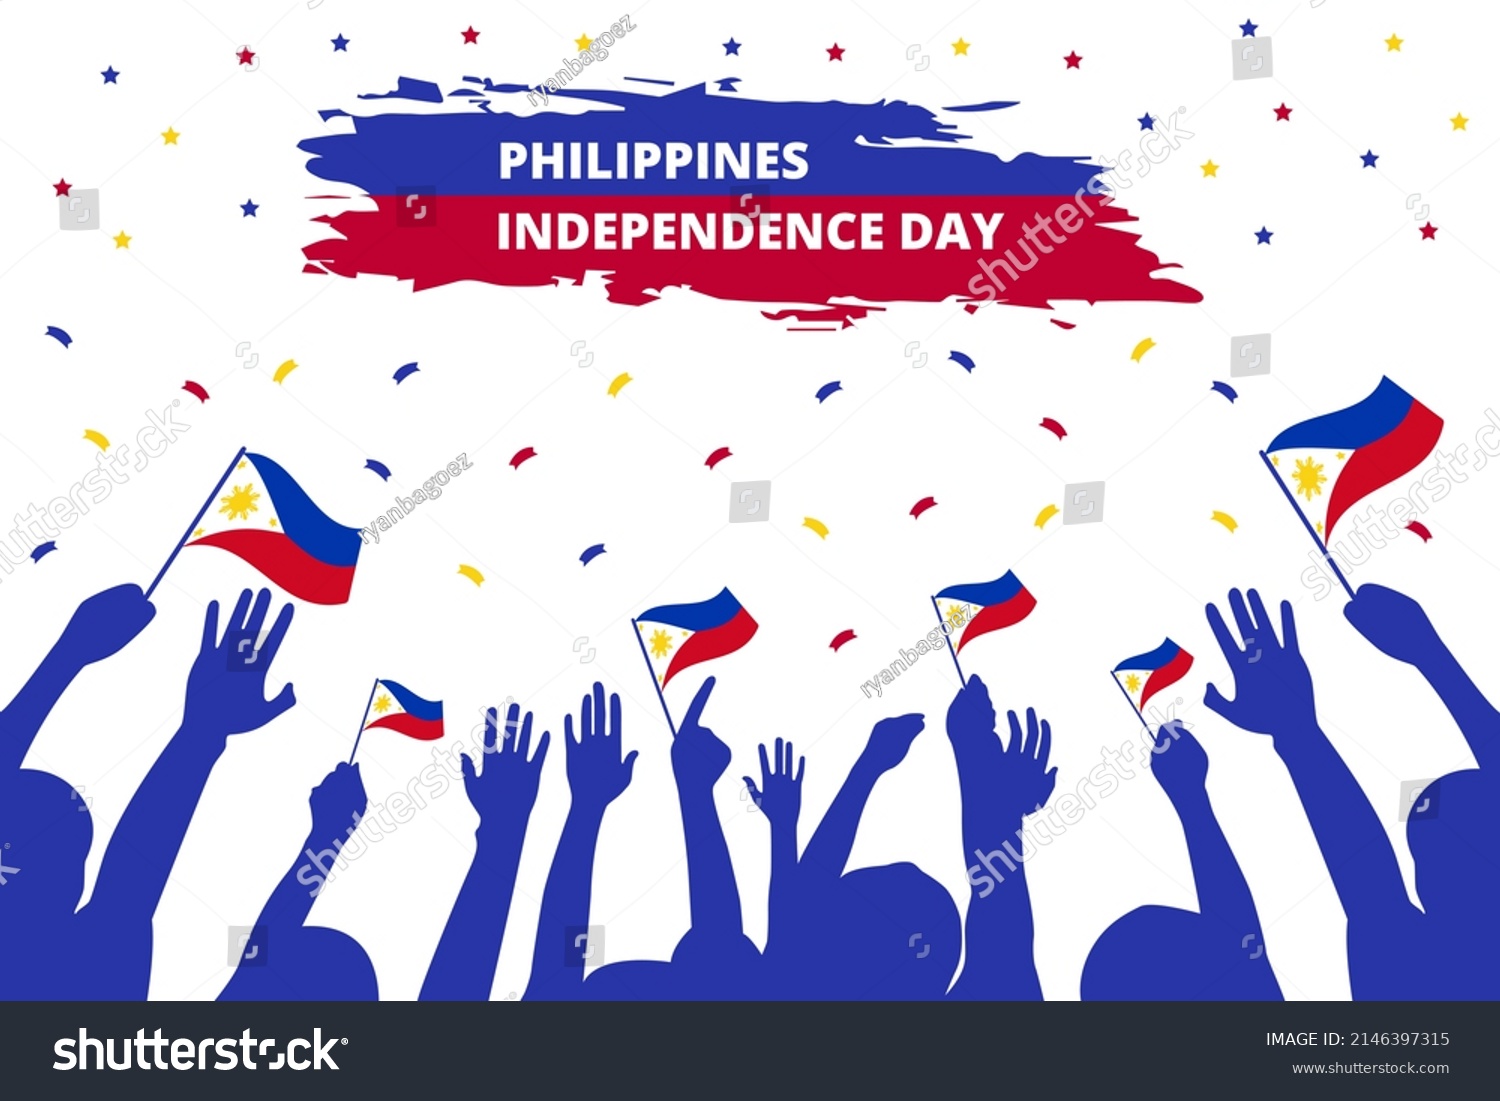 Philippines Independence Day Celebration Background Vector Stock Vector